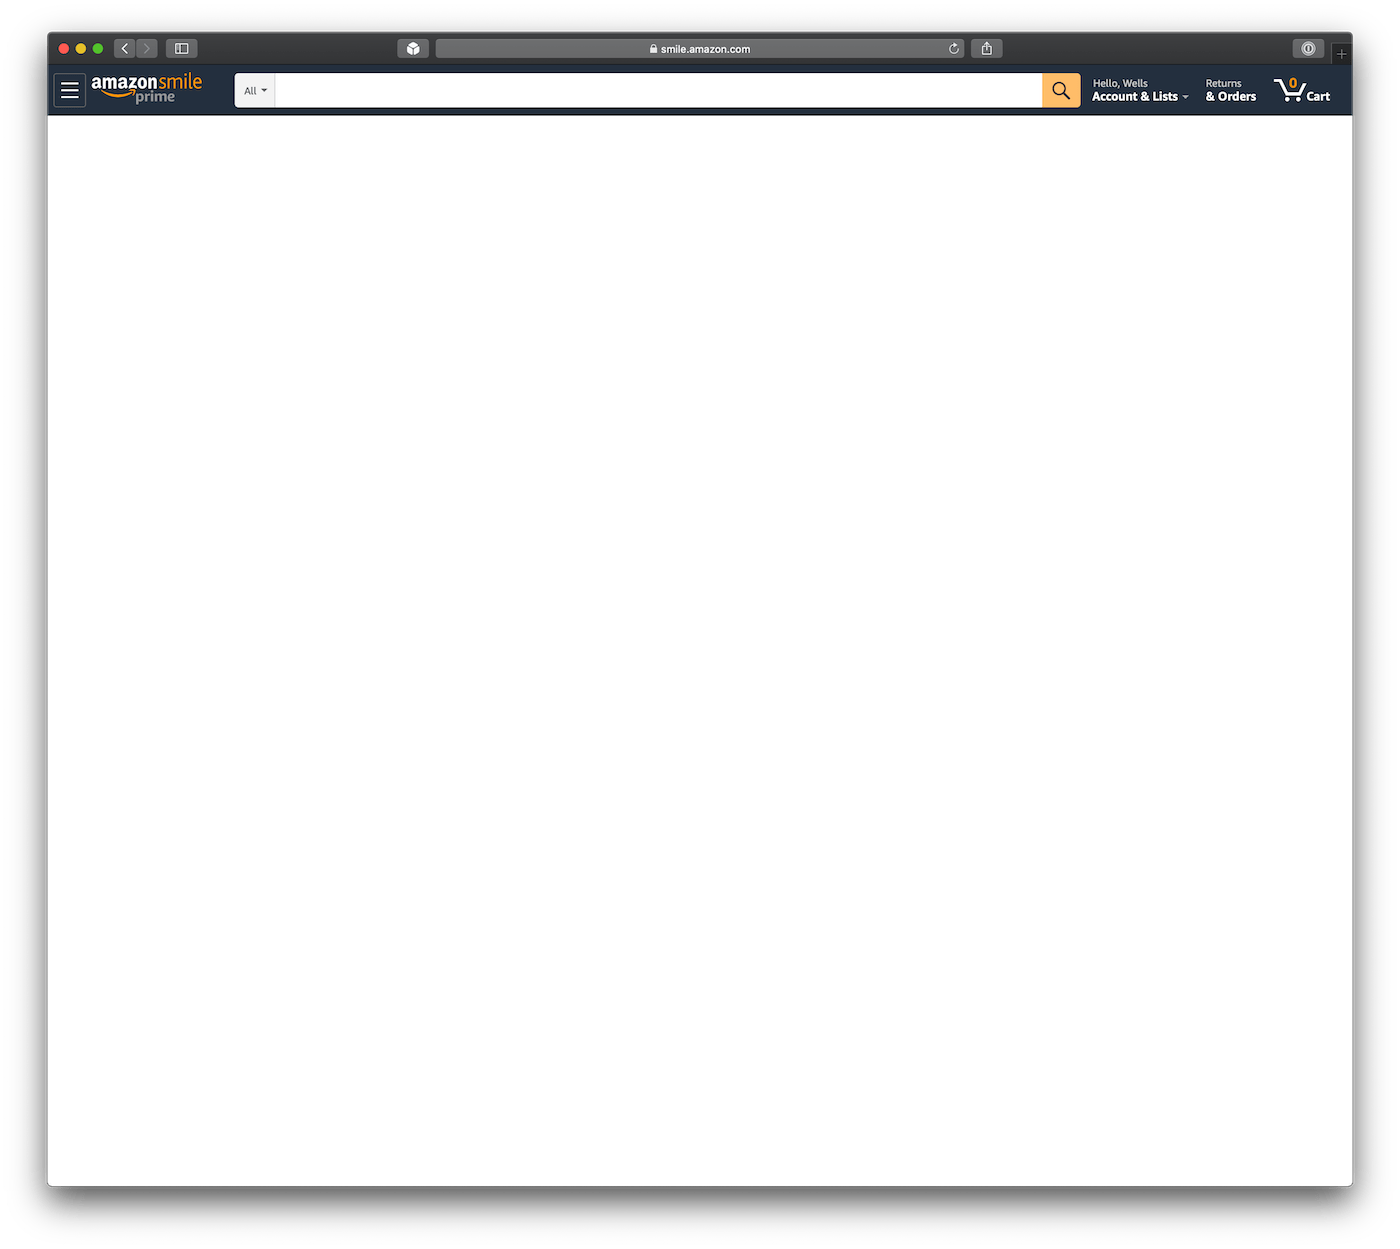 amazon.com homepage after